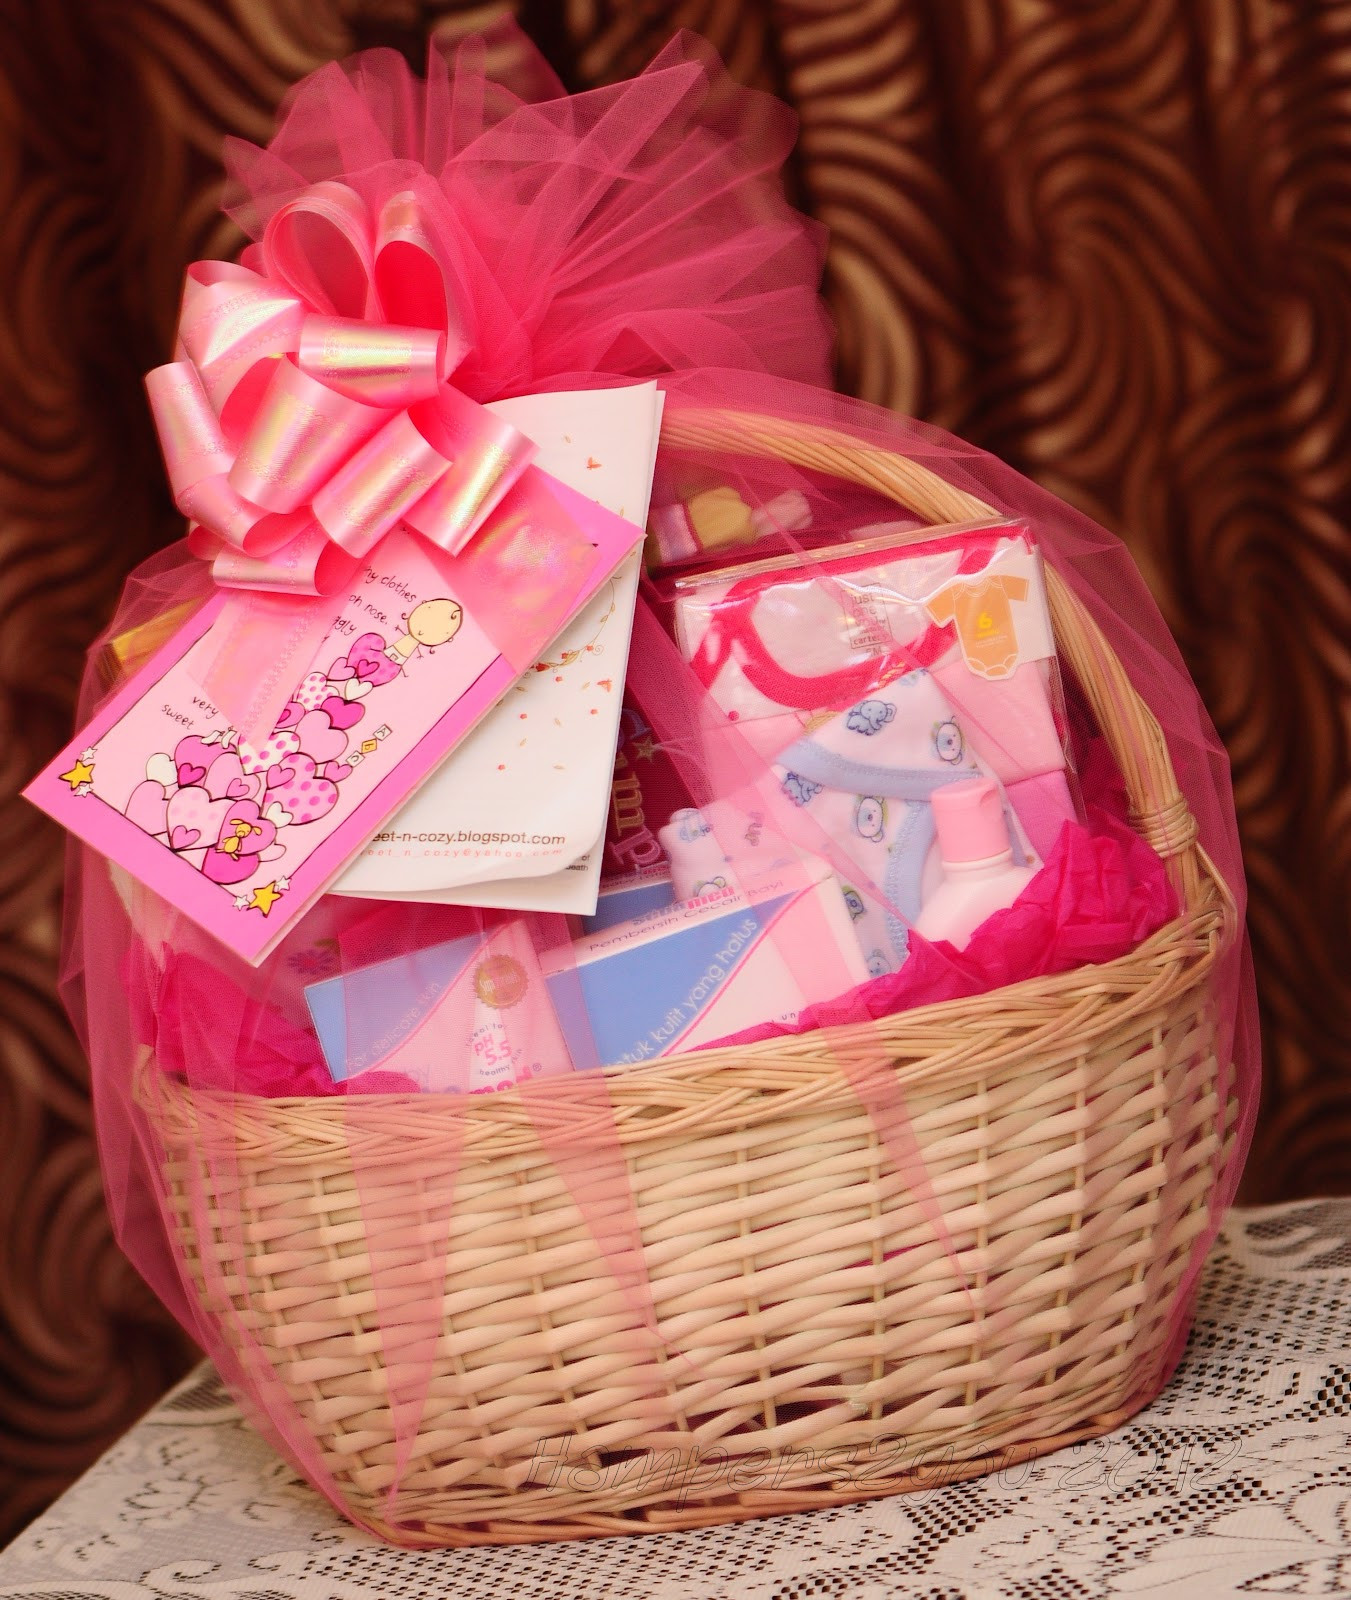 Gift Baskets For New Baby Girl
 Hampers2you Baby Gift Baskets for Newborn Girl